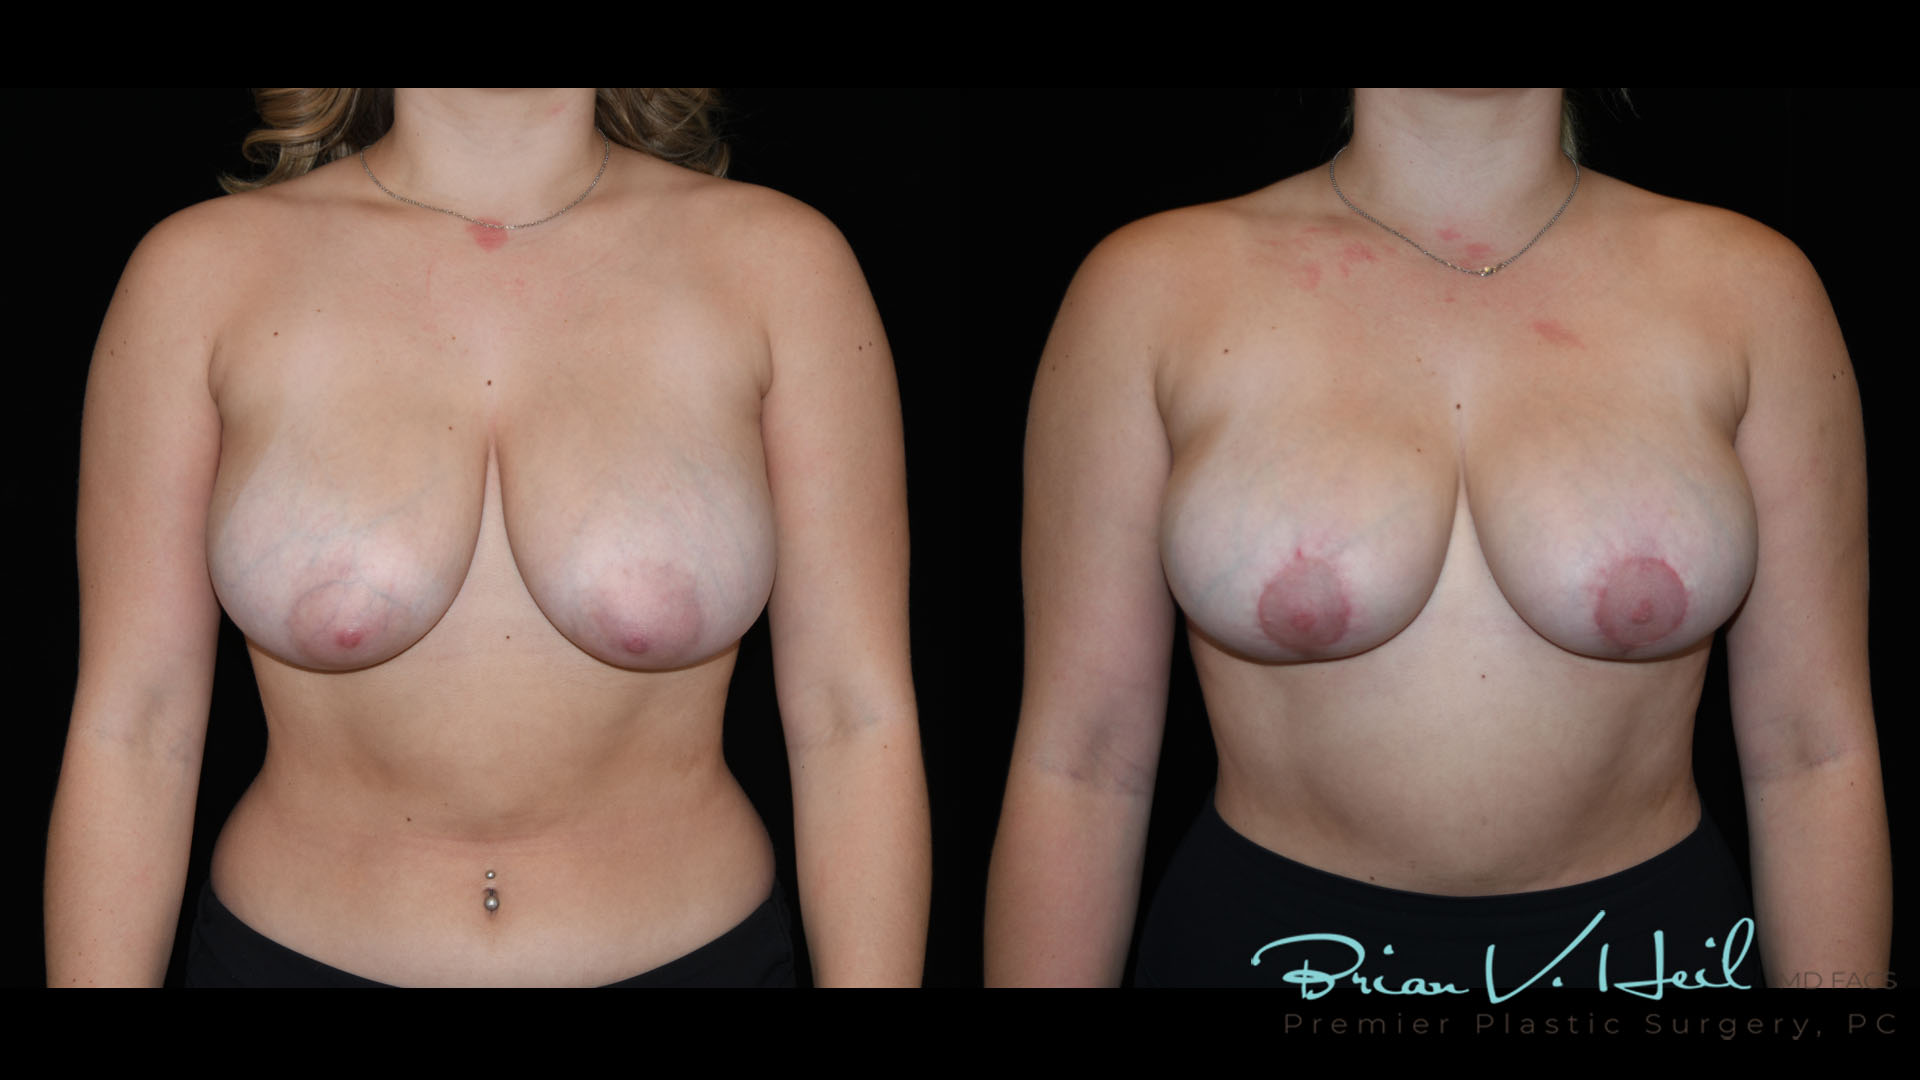 Breast Lift Before and After | Premier Plastic Surgery